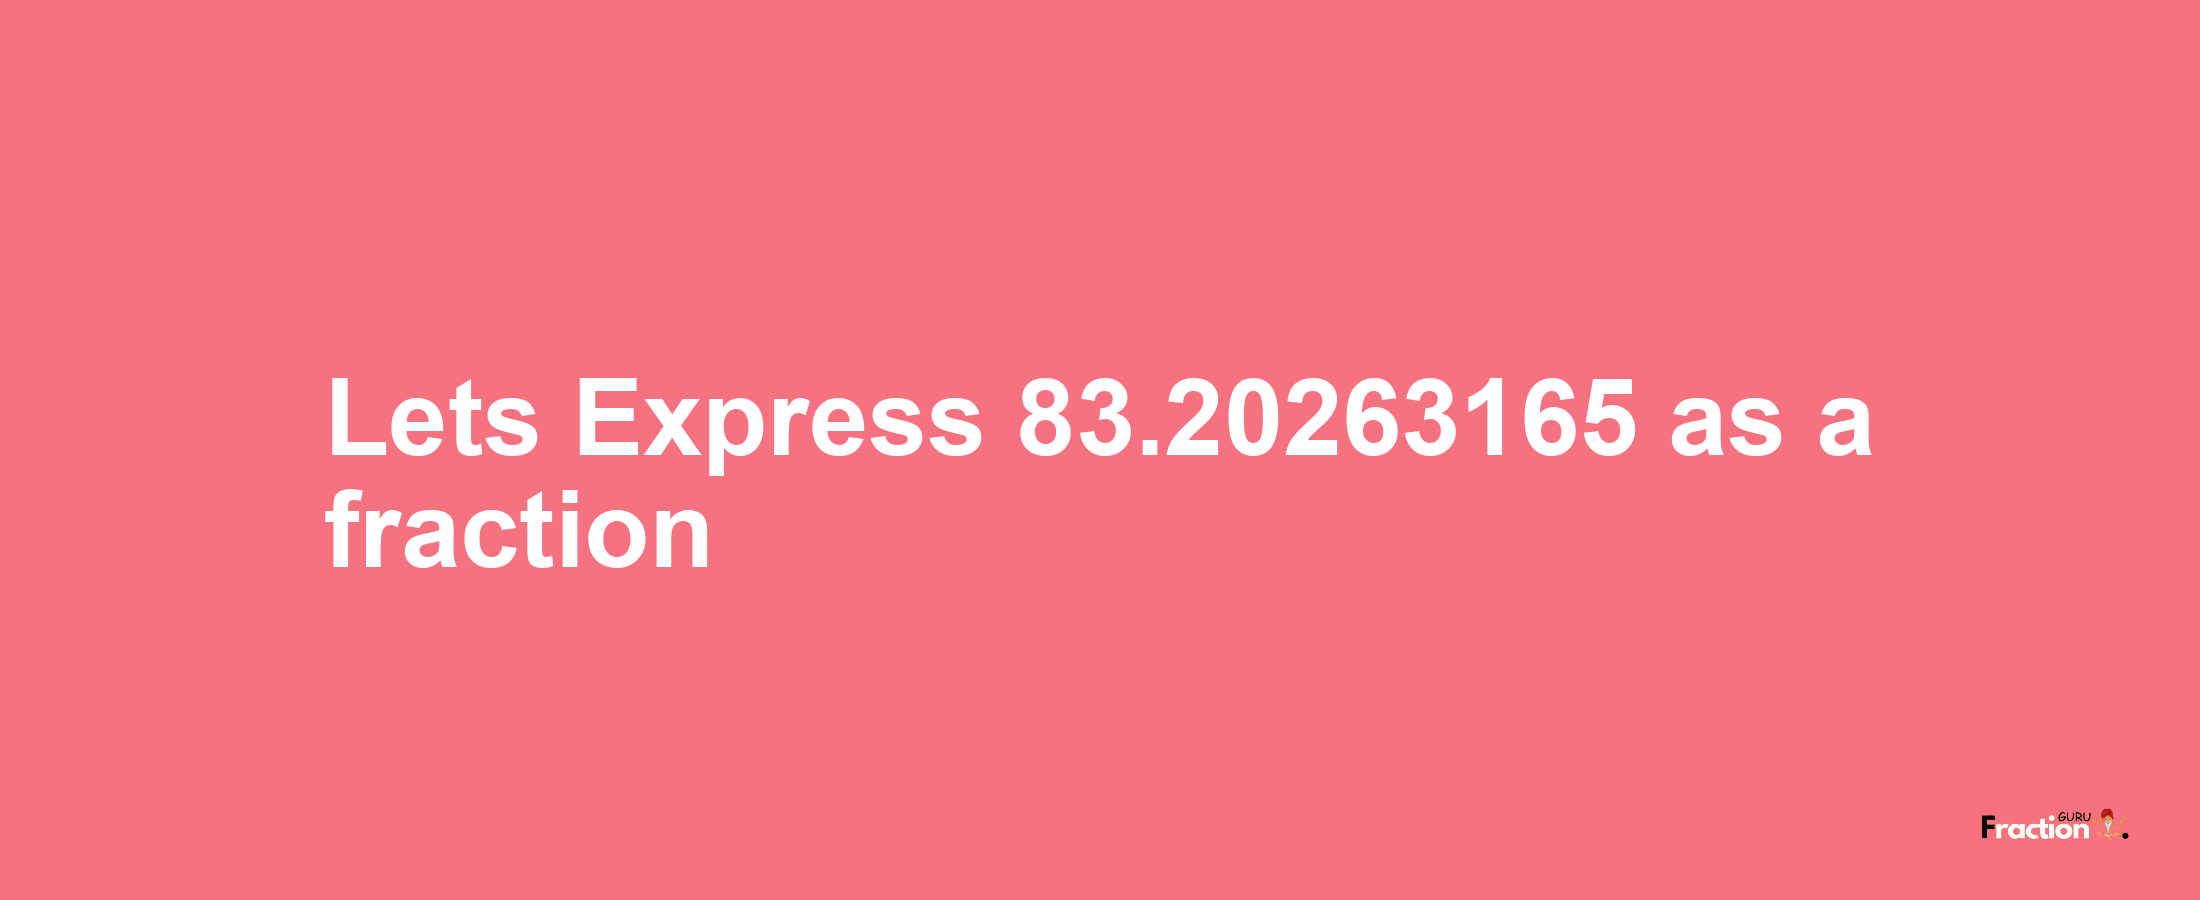 Lets Express 83.20263165 as afraction